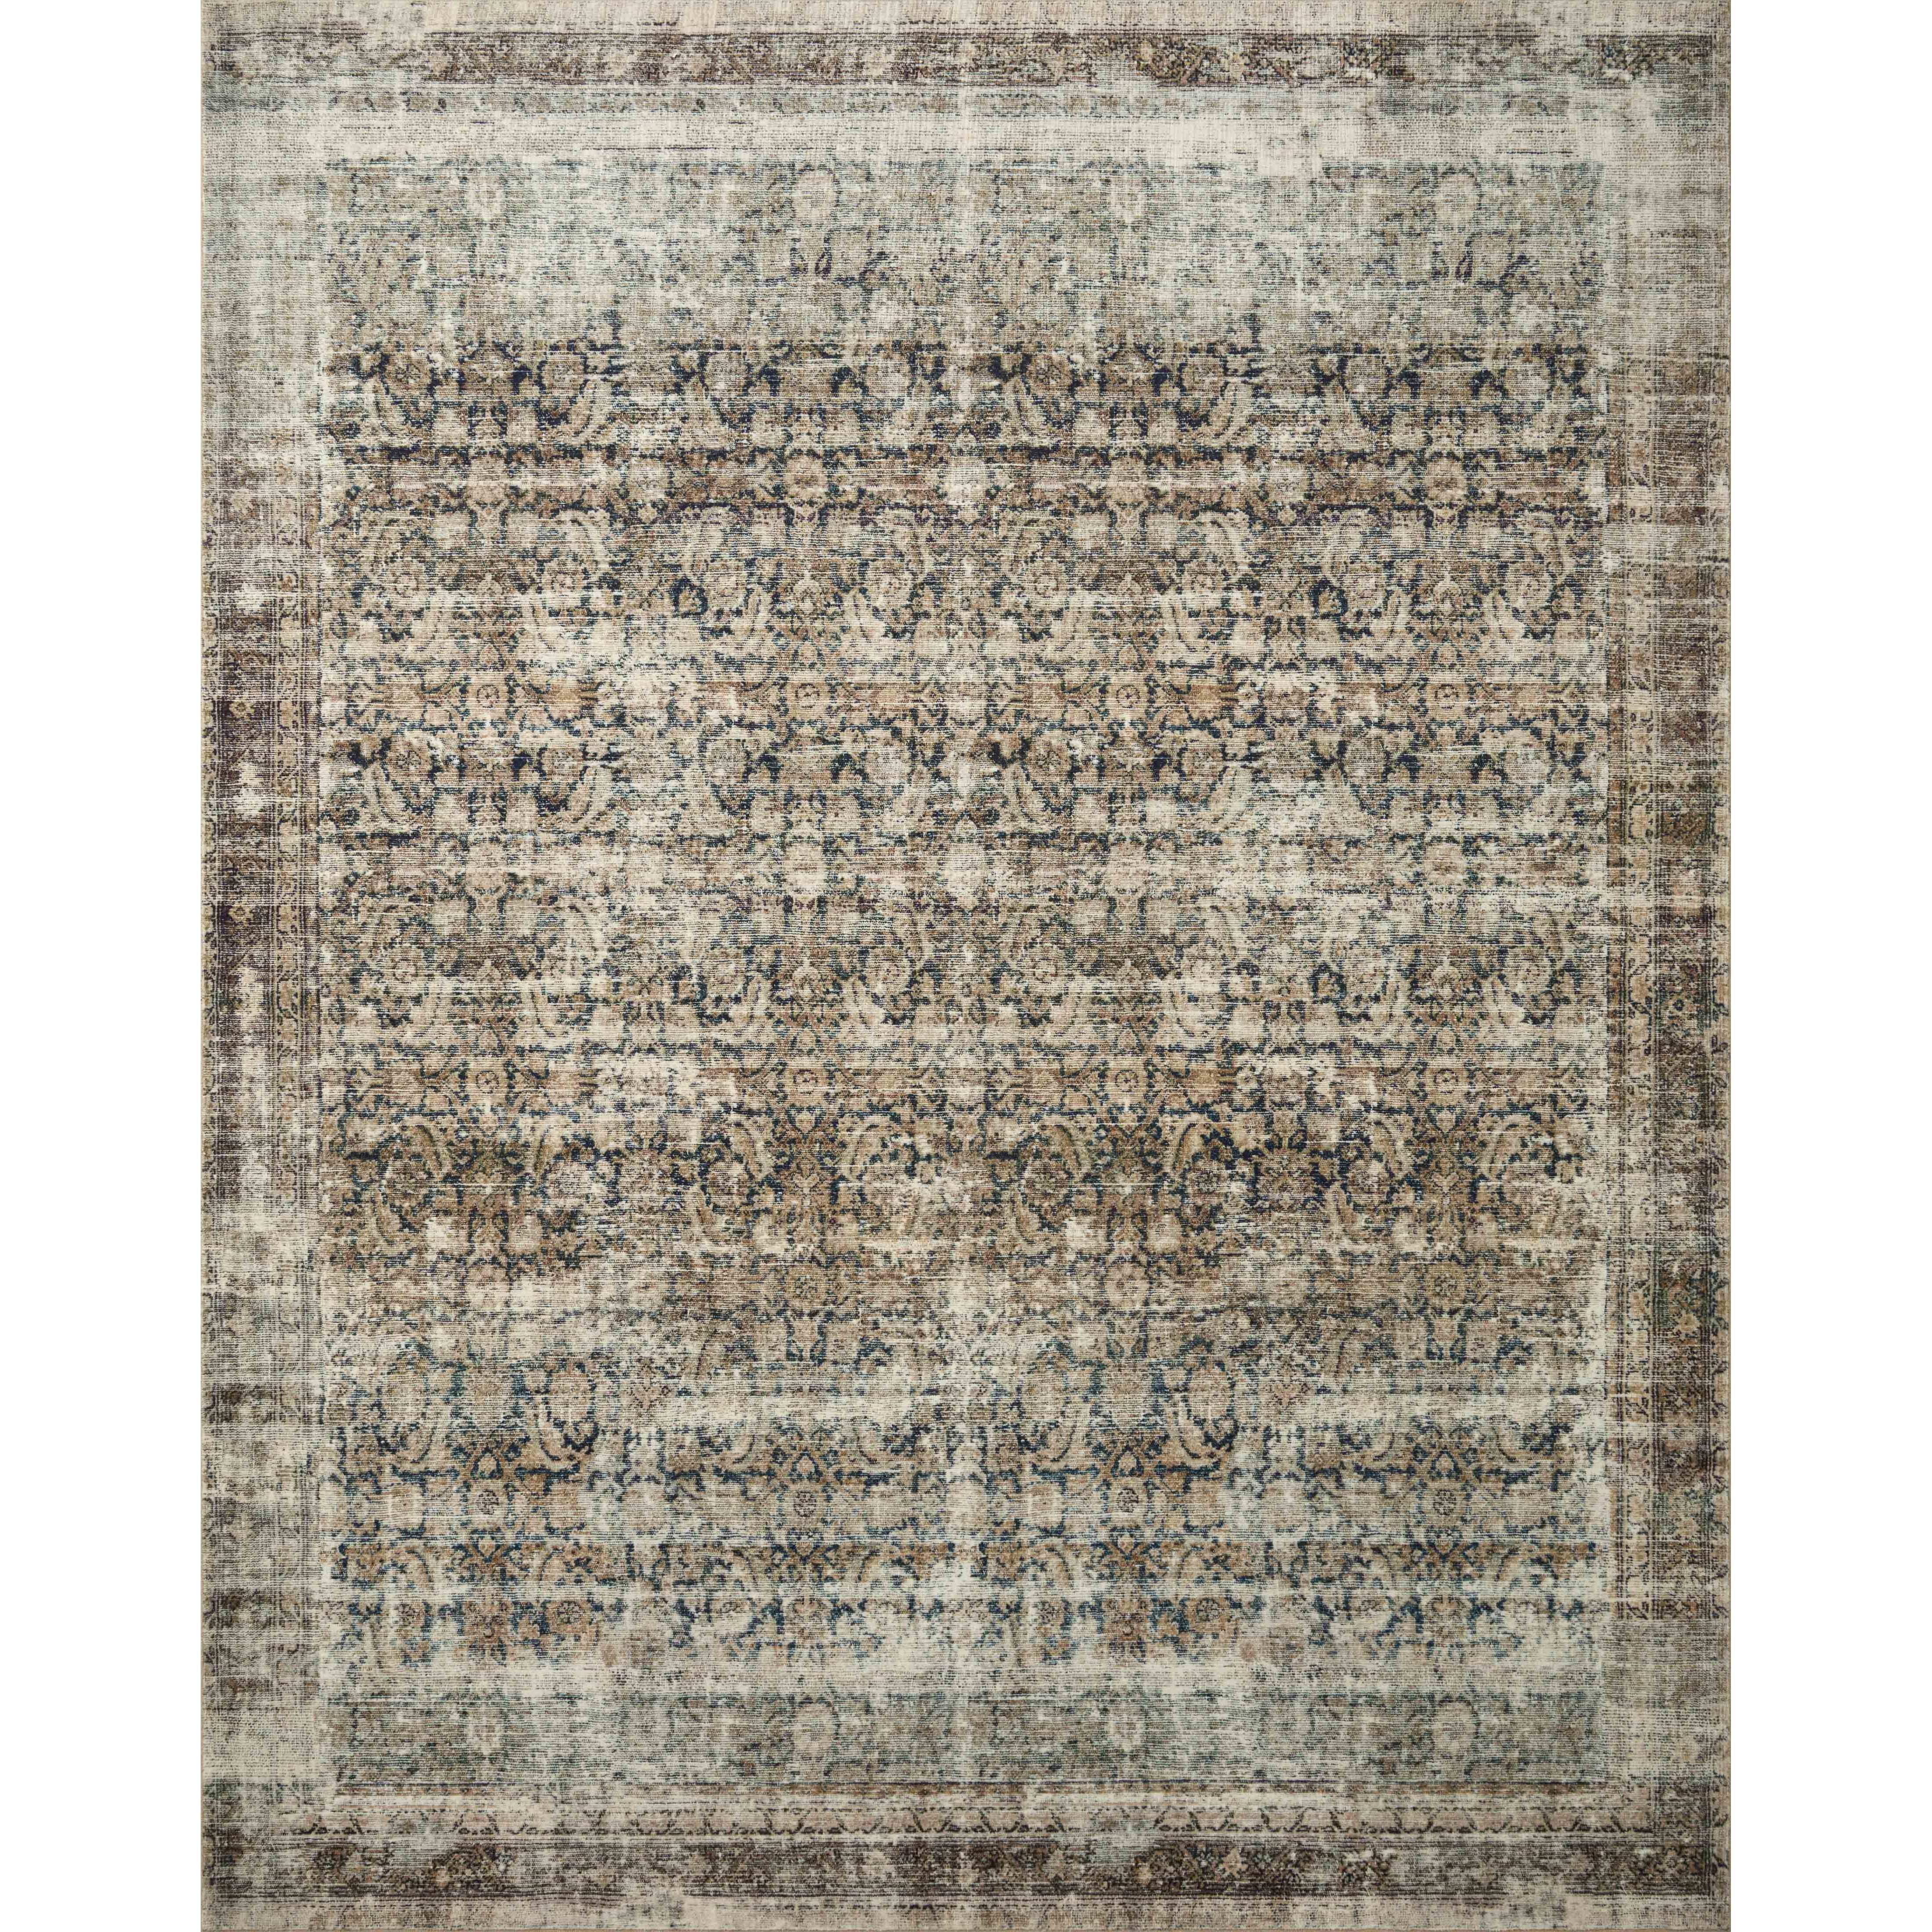 With the faded feel of an antique rug, the Amber Lewis x Loloi Morgan Navy / Sand Rug is a feat of modern printed construction. These impressive area rugs expertly blend sophisticated tones to recreate the dynamic colors of a vintage textiles. Power-loomed of CloudPile™ construction, these rugs are extra-soft to walk upon yet still durable for high-traffic rooms. Amethyst Home provides interior design services, furniture, rugs, and lighting in the Kansas City metro area.